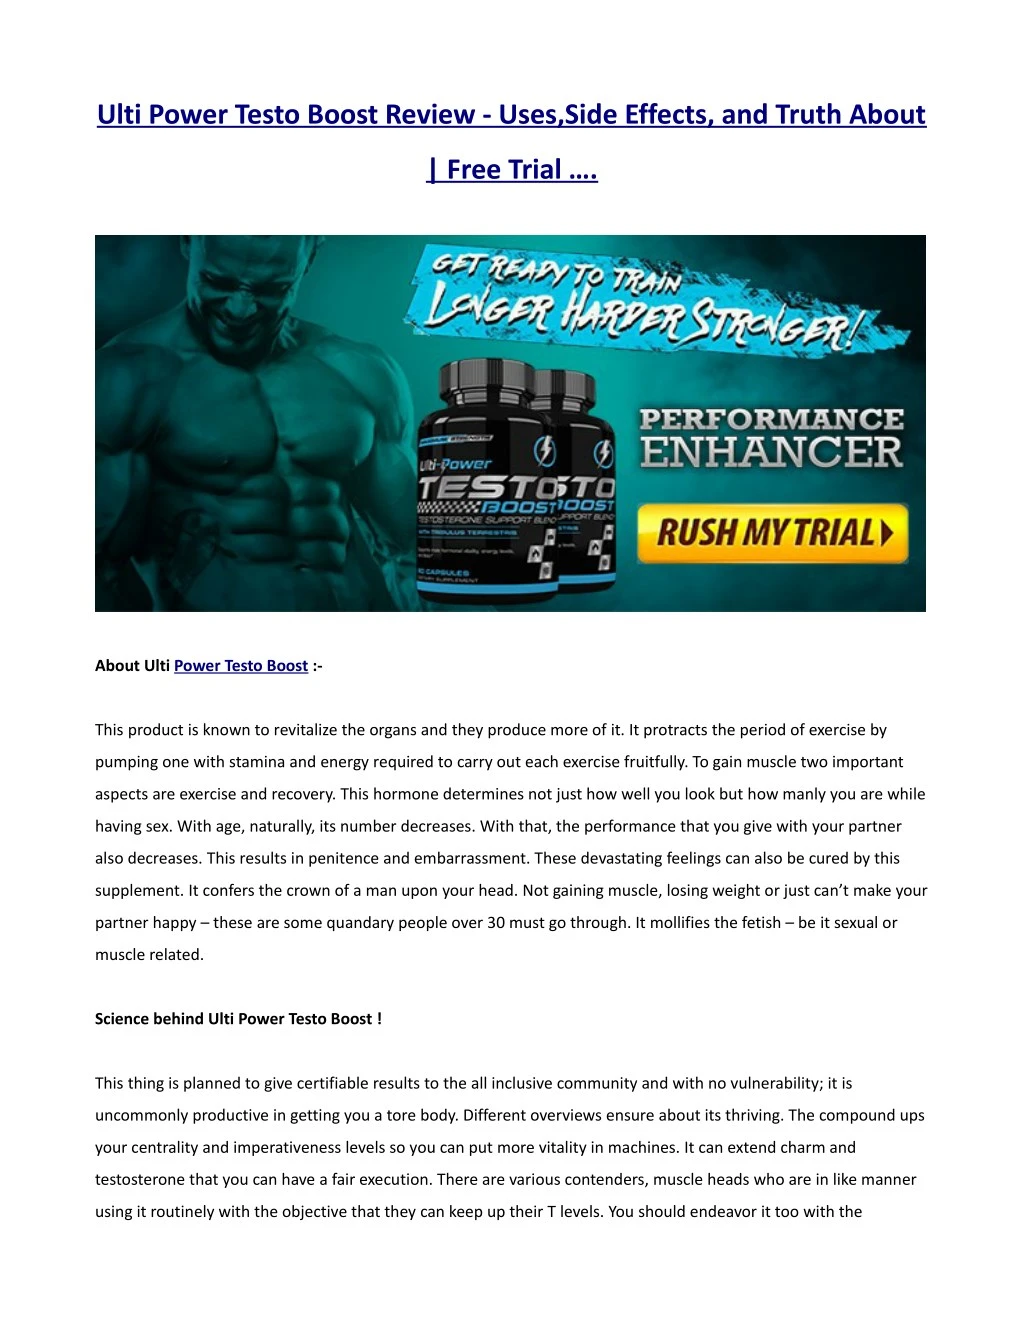 ulti power testo boost review uses side effects